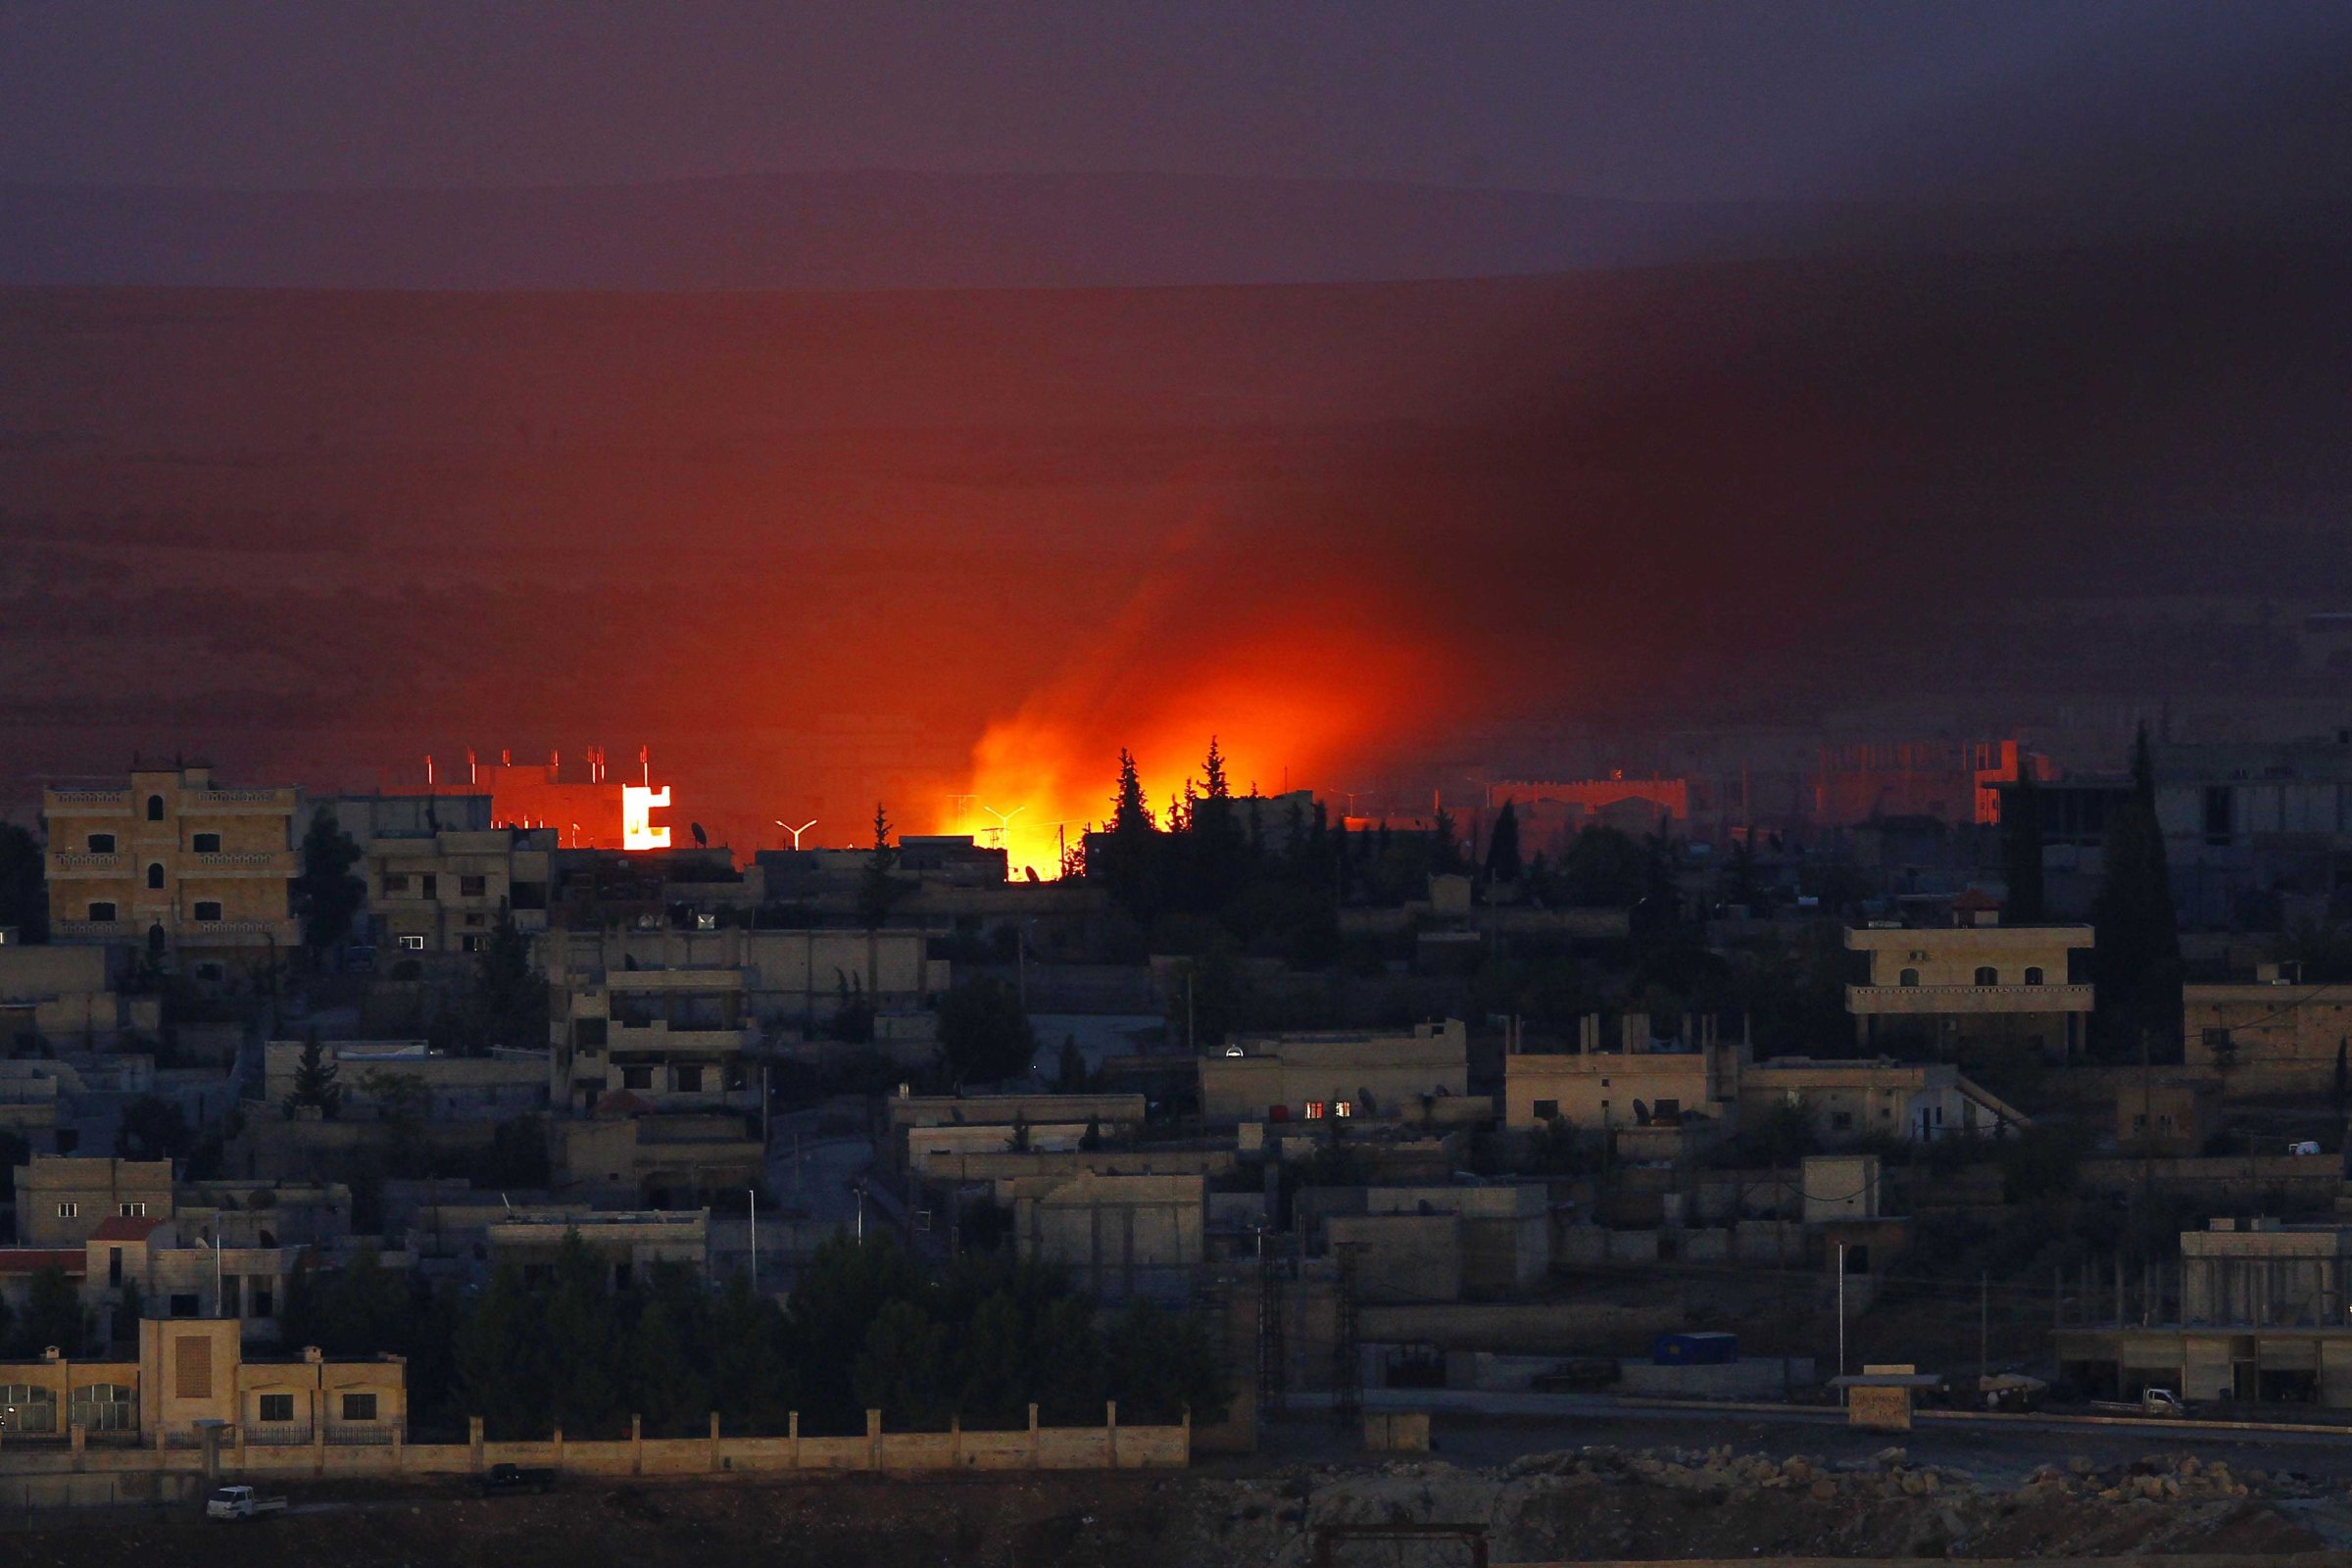 Fire is seen after an US airstrike on ISIS positions in Kobani, Syria, on Oct. 15, 2014.